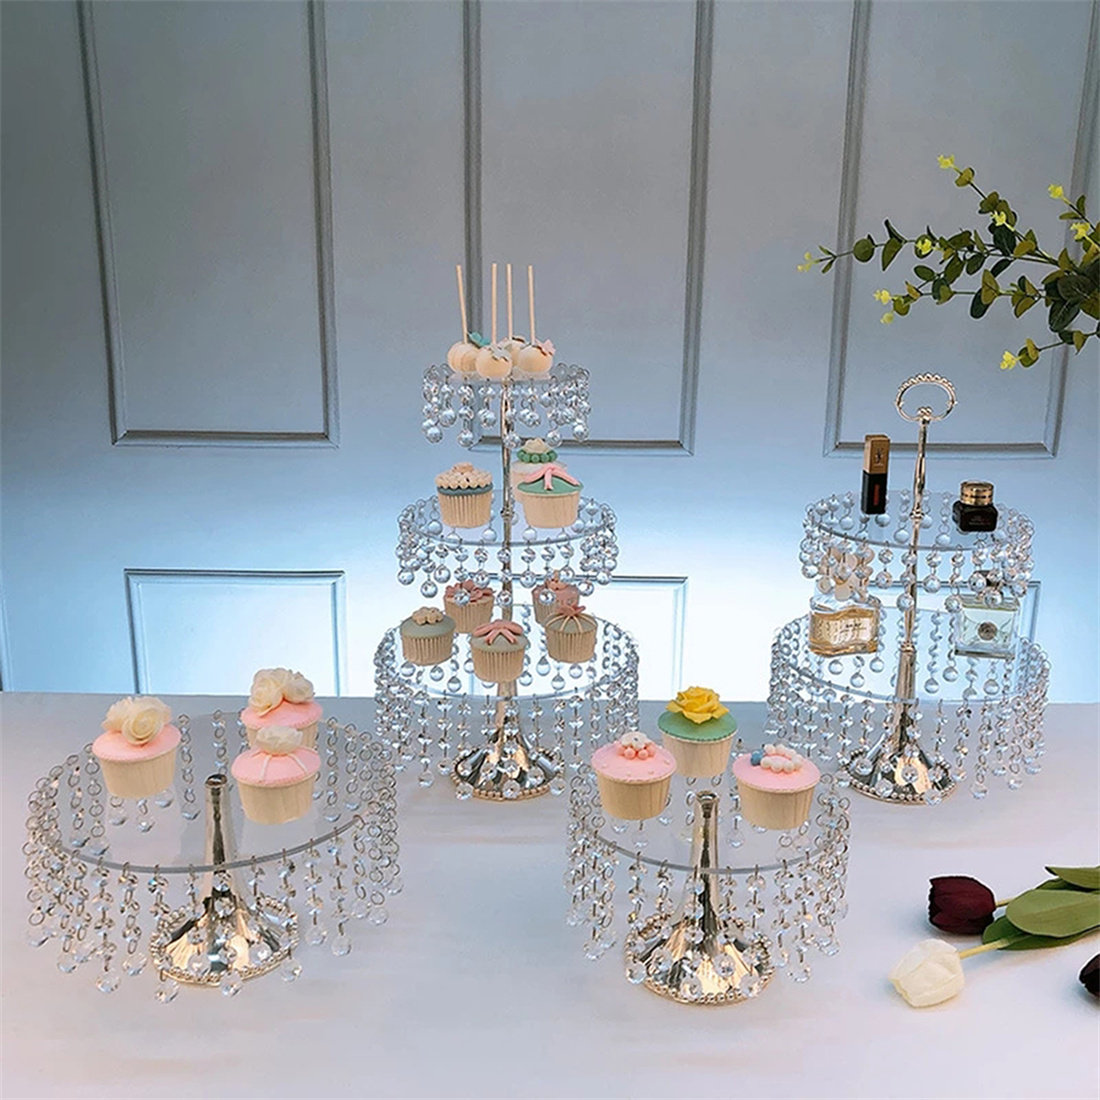 Cake Stand Chandelier Cake Stand Crystal Cake Stand Wedding Cake Stand LED  Lights by Crystal Wedding Uk - Etsy